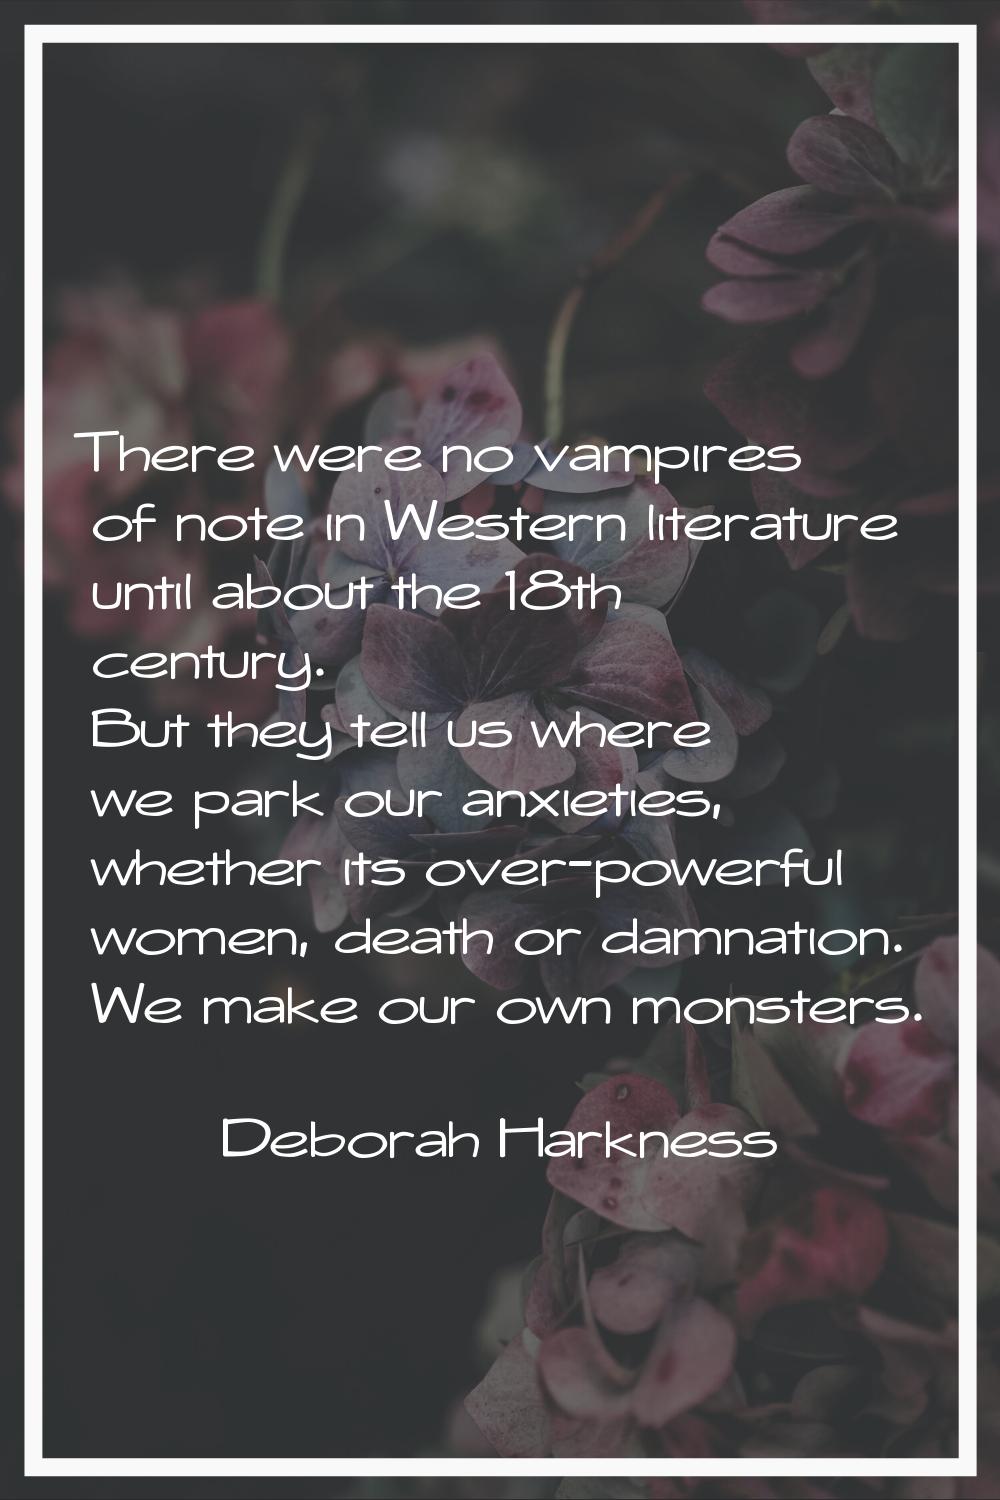 There were no vampires of note in Western literature until about the 18th century. But they tell us